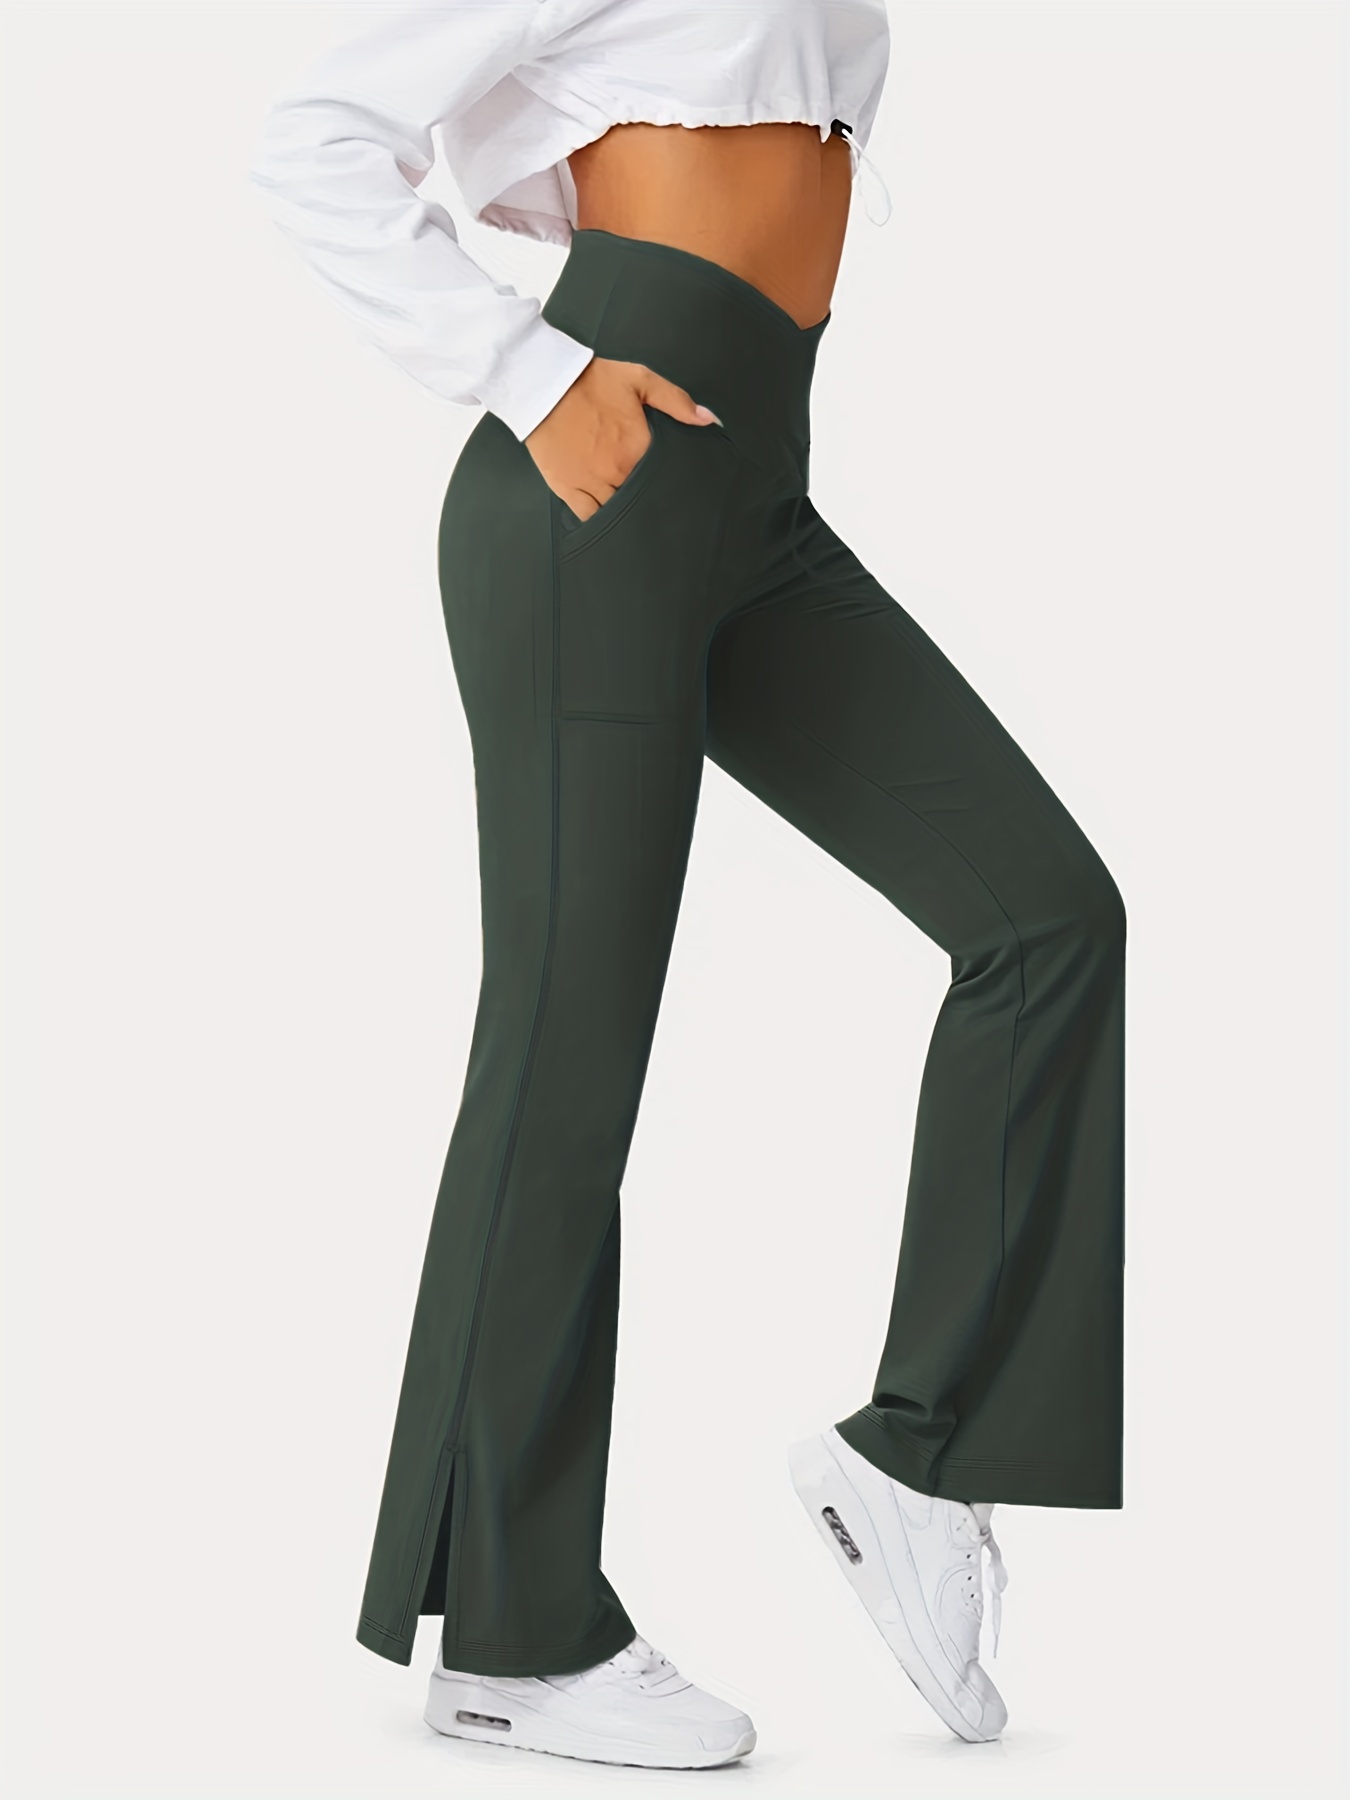 Womens Plus Stretch Pants - Bottoms, Clothing